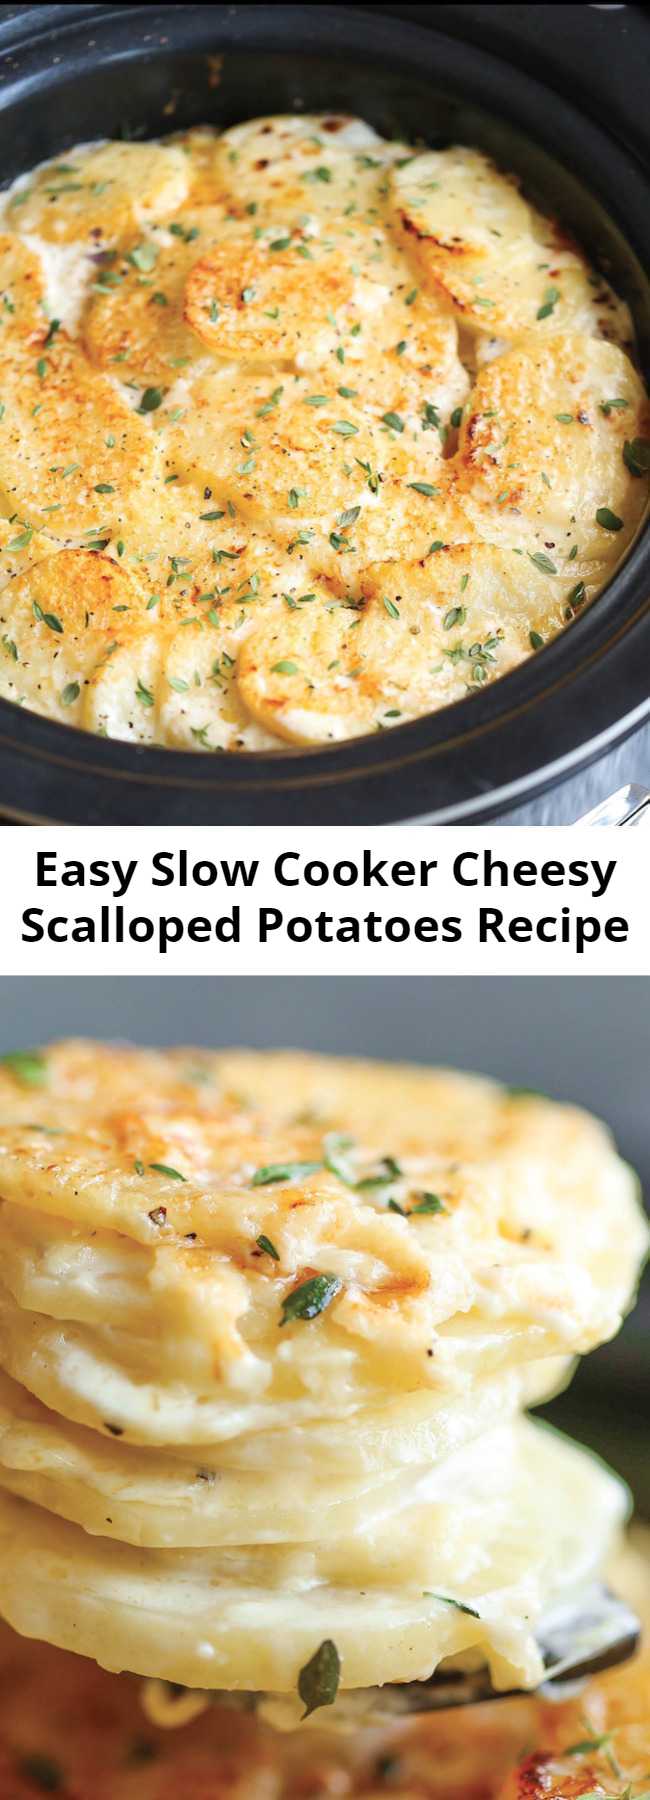 Easy Slow Cooker Cheesy Scalloped Potatoes Recipe - This crockpot version of scalloped potatoes is so EASY, creamy, tender and cheesy! And it frees up your oven space!